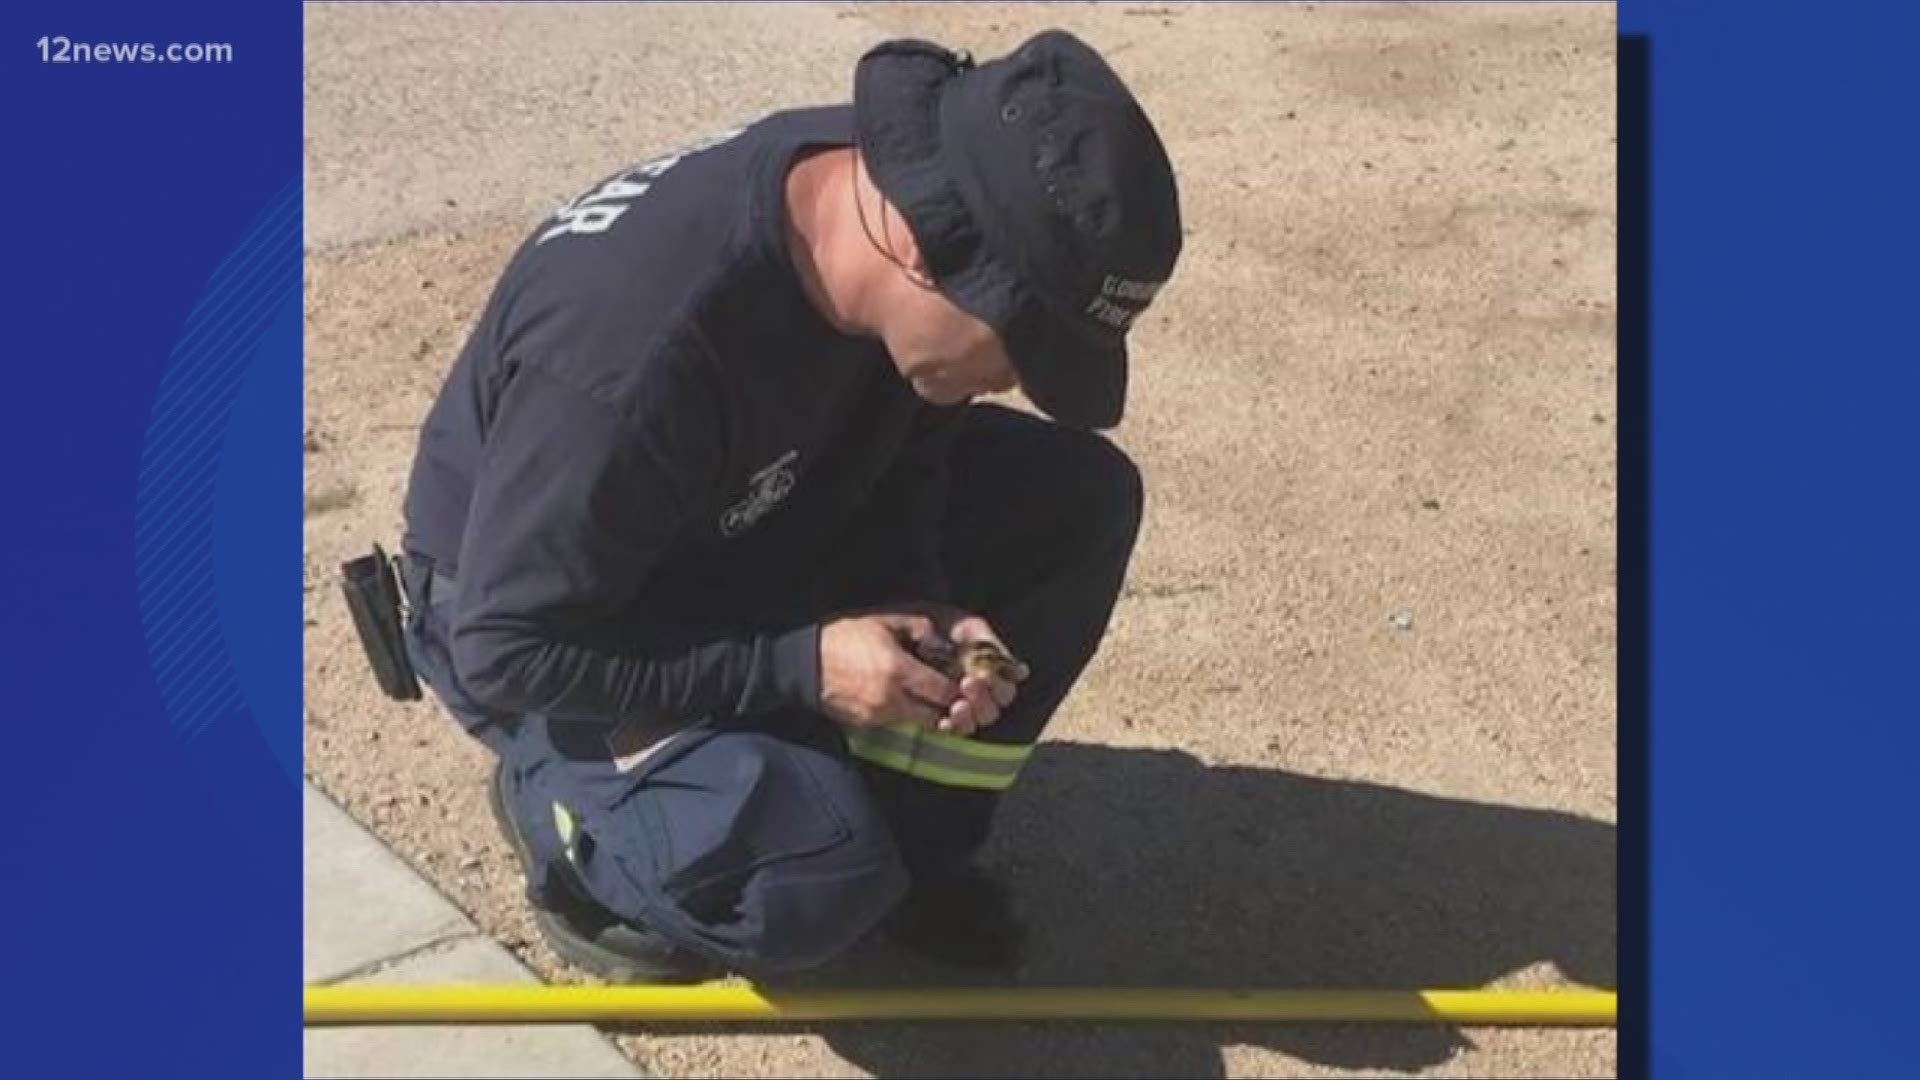 Goodyear firefighters going above and beyond to save lives. They rescued a family of ducks early Saturday morning. The duck family was trapped at a bridgehead, trying to swim against the current.